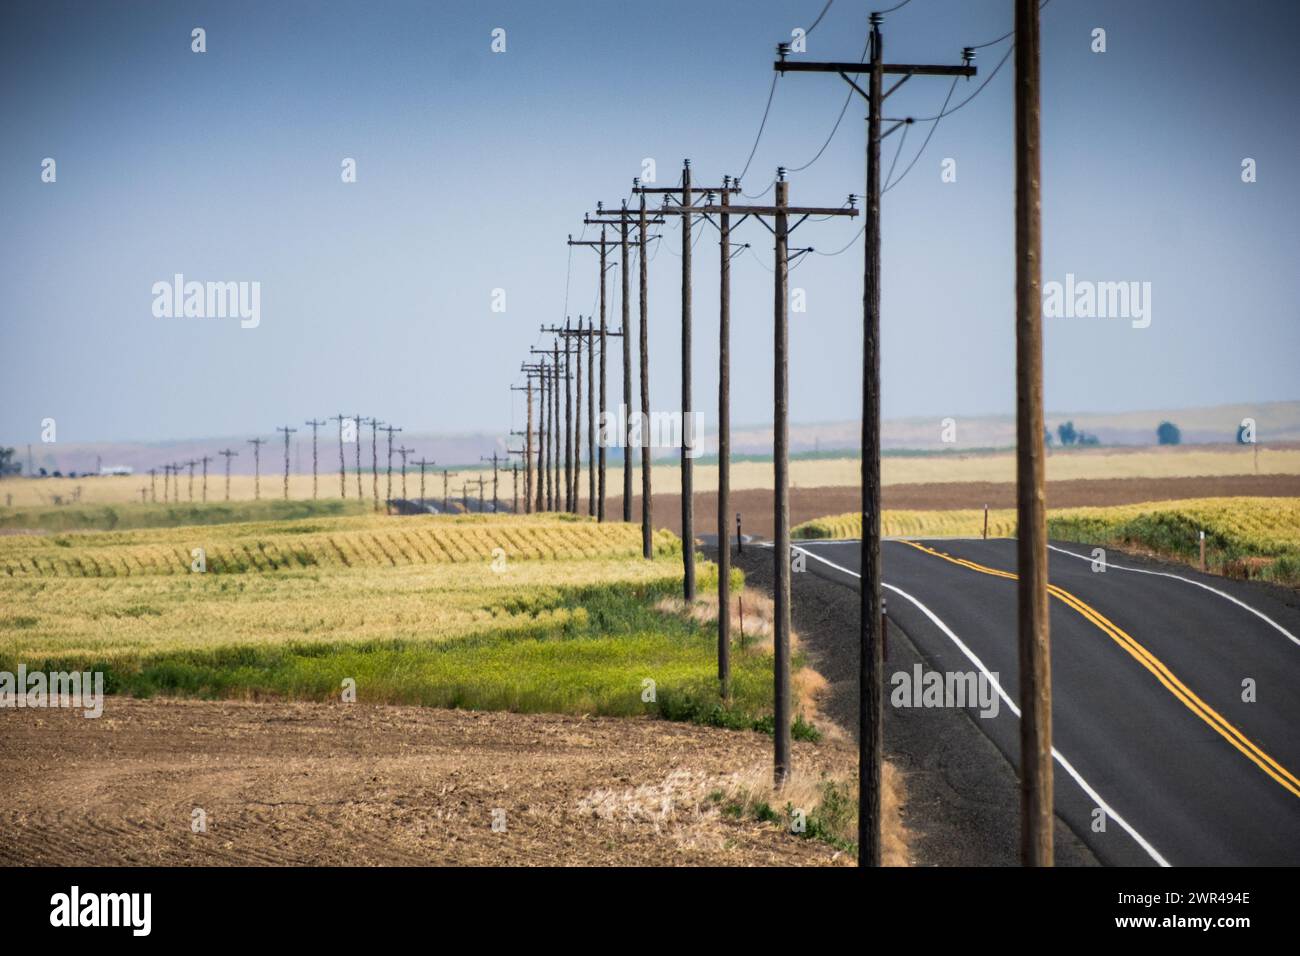 Utility poles line Route 261 south of Ritzville in Eastern Washington, USA. Stock Photo